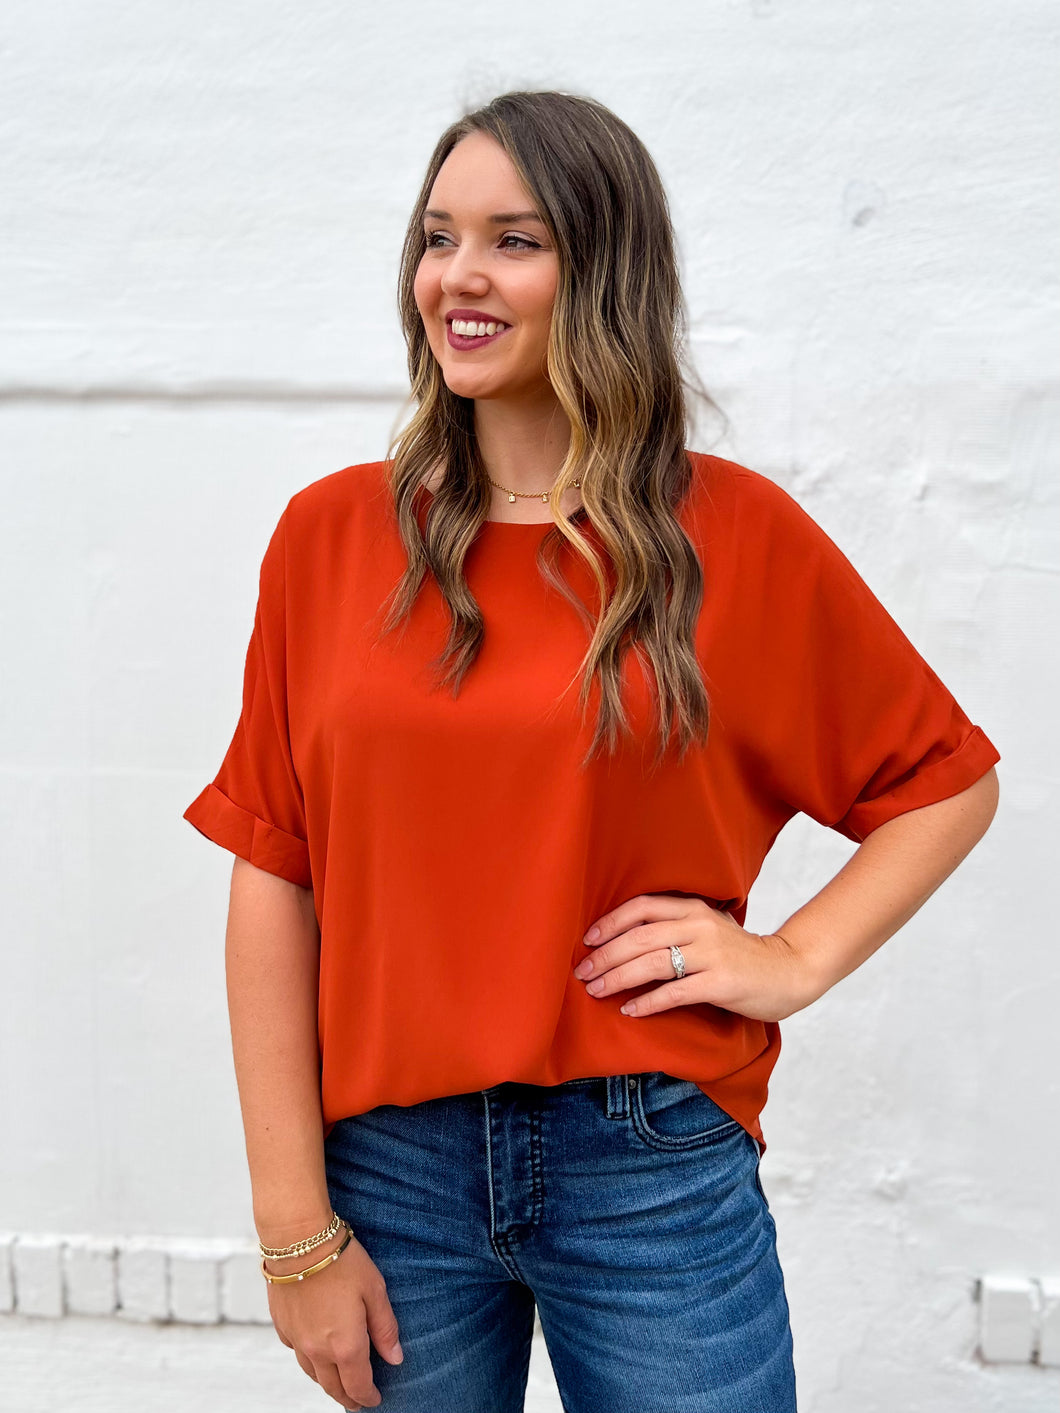 Glam: Dolman High Low Top in Apricot GT3091-A